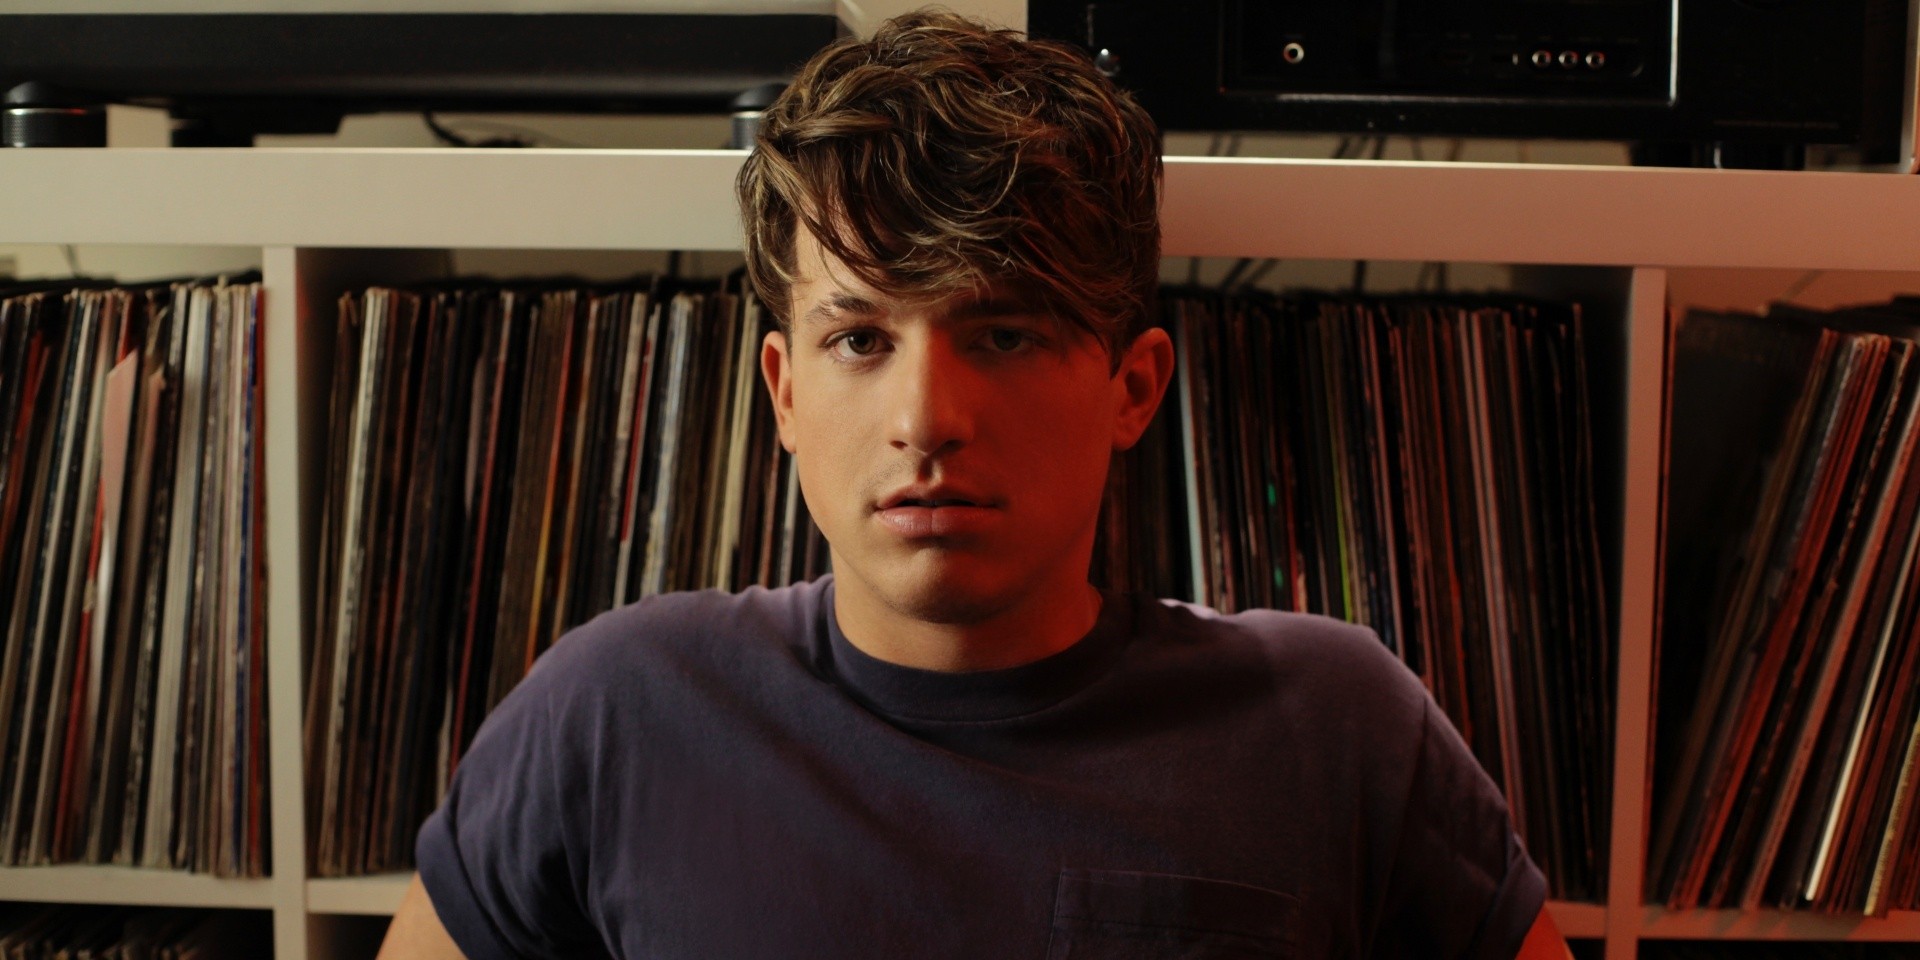 "Being able to play in Singapore for a sold out show is crazy": An interview with Charlie Puth